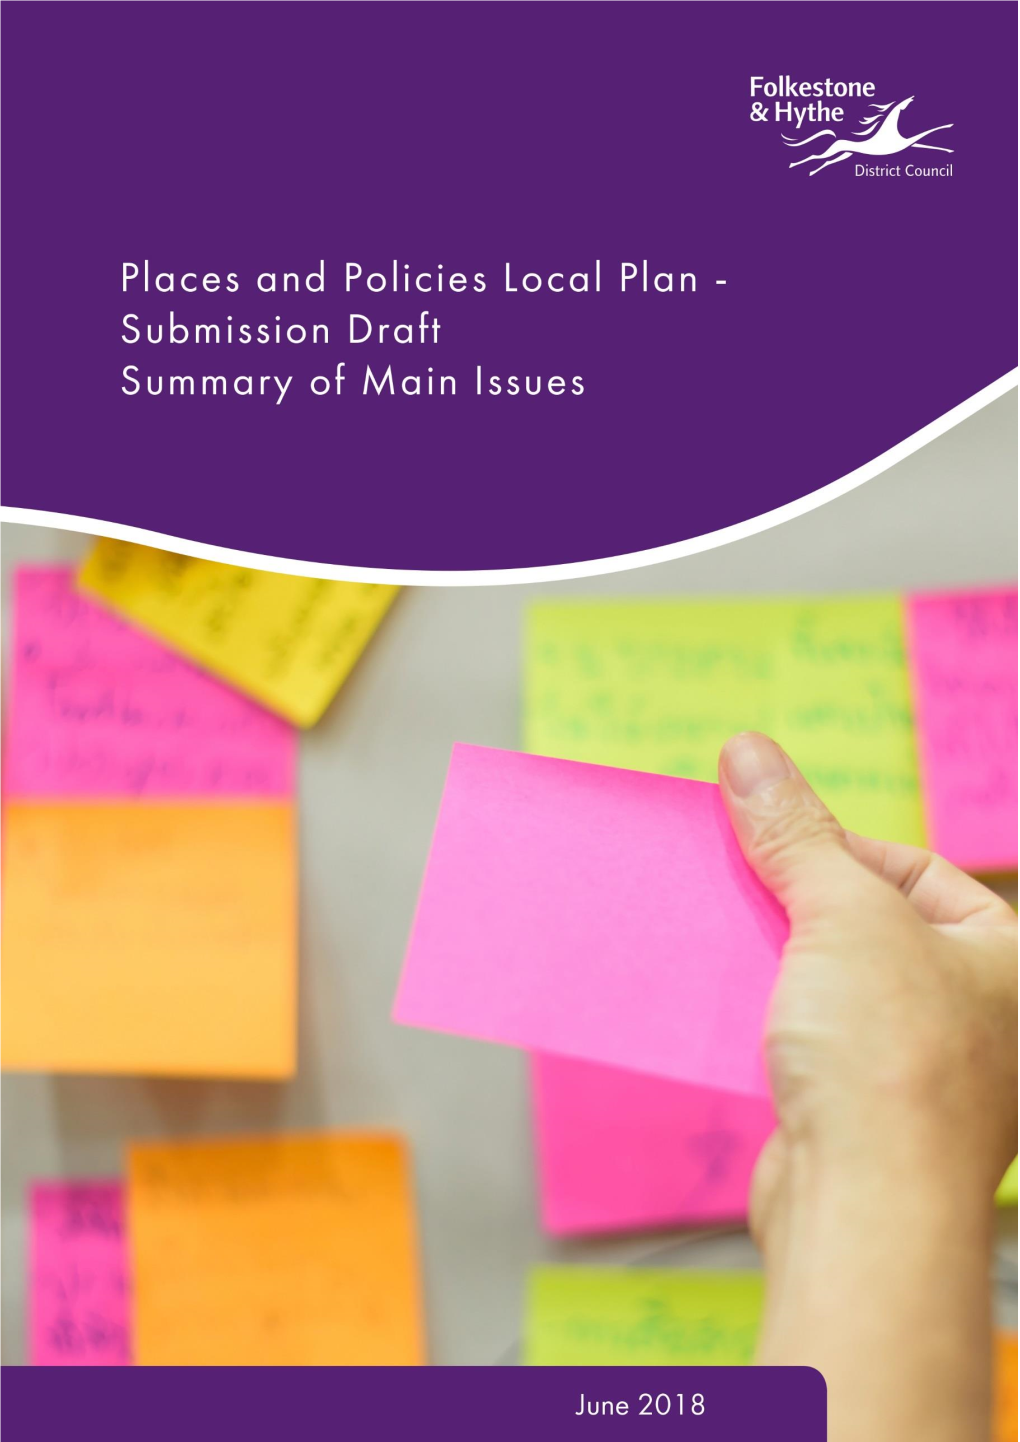 Folkestone & Hythe District Places and Policies Local Plan Submission Draft